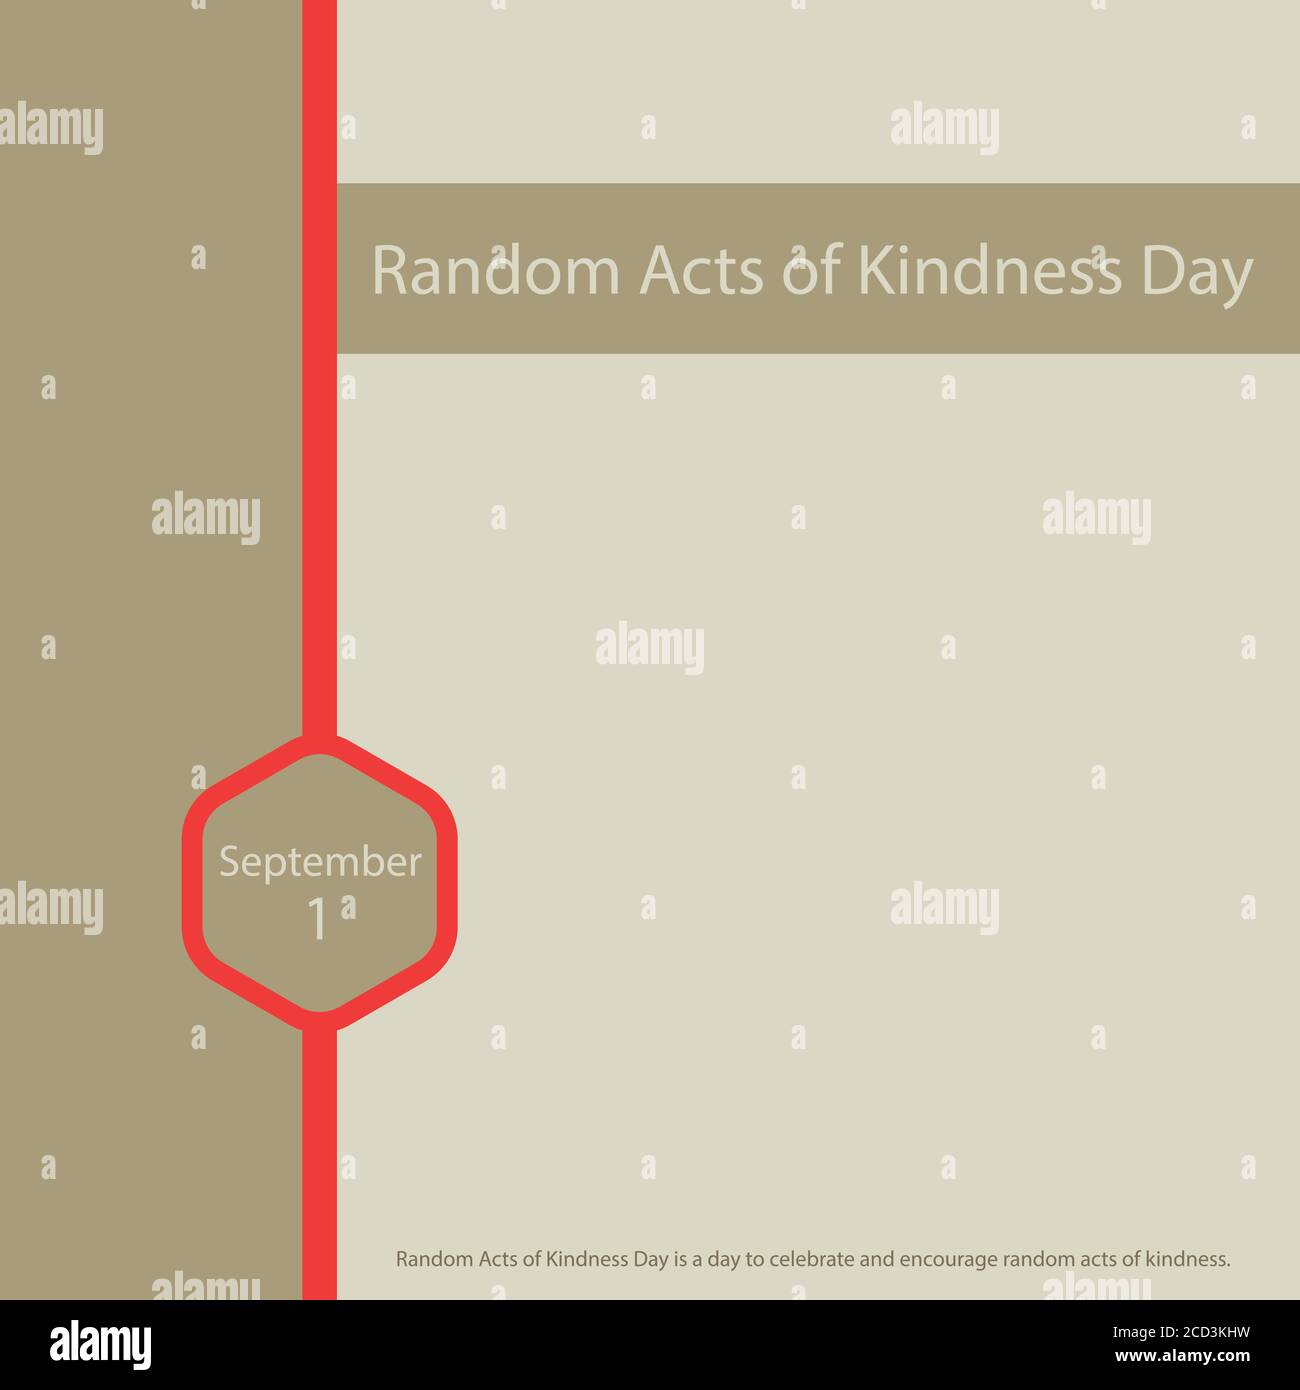 Random Acts of Kindness Day is a day to celebrate and encourage random acts of kindness. Stock Vector